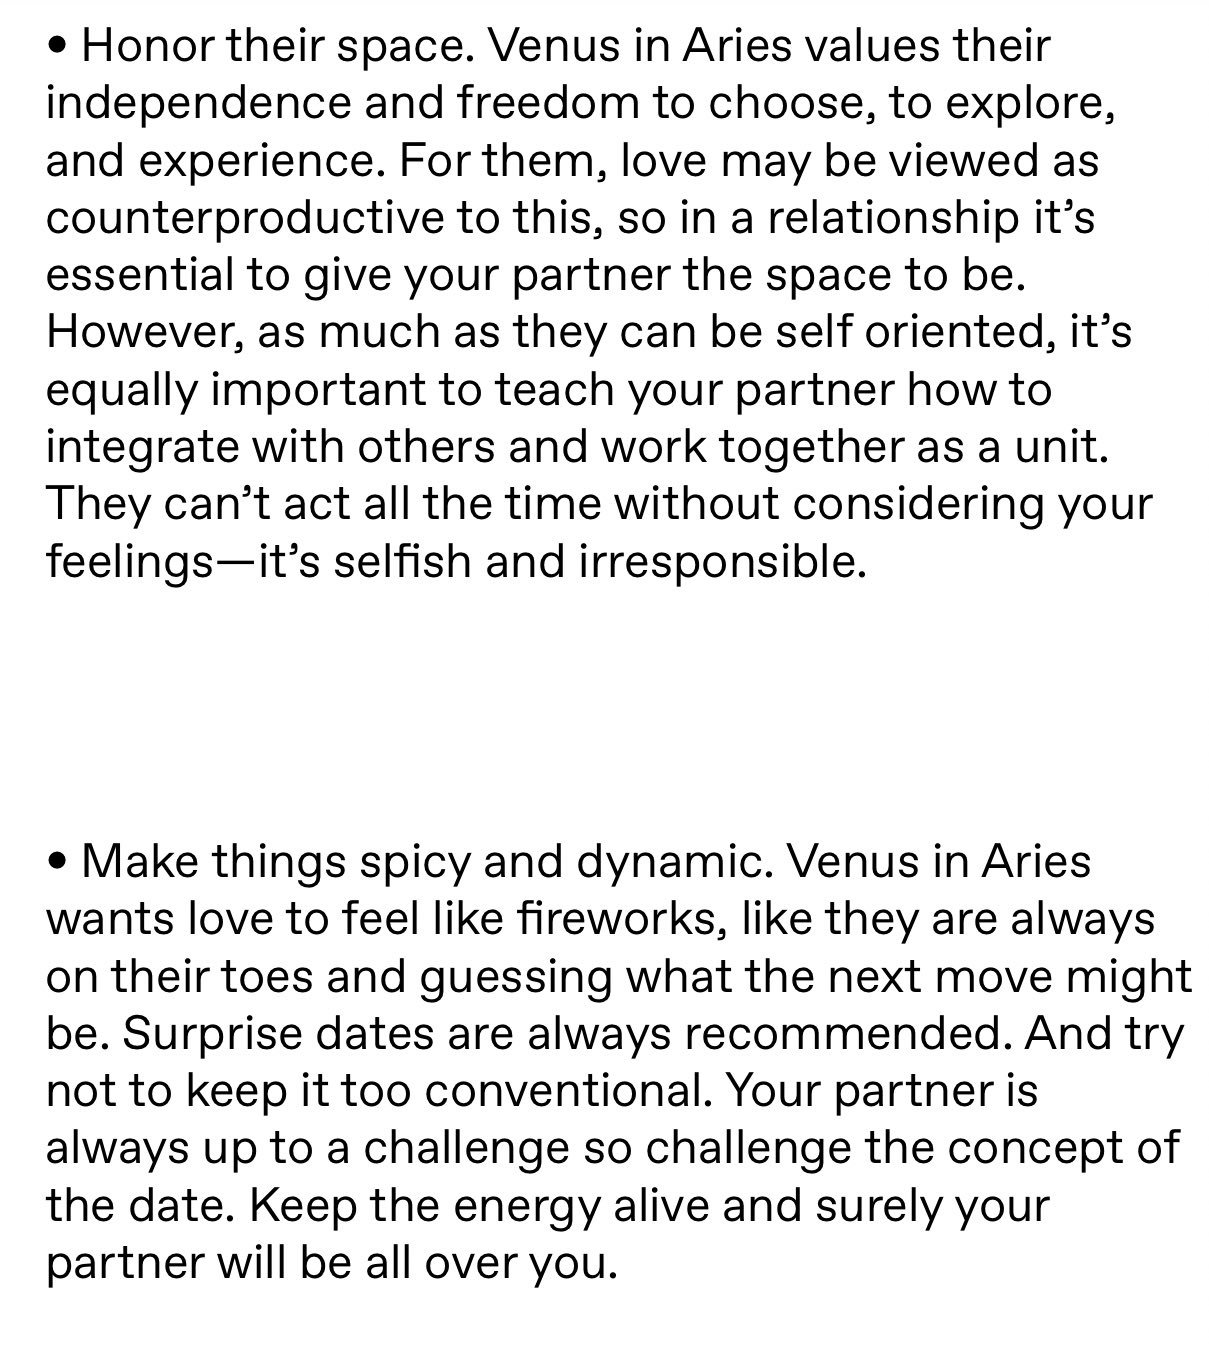 tess ar Twitter: "What to expect when dating a Venus in Aries:  https://t.co/XSLKoO1Kbi" / Twitter